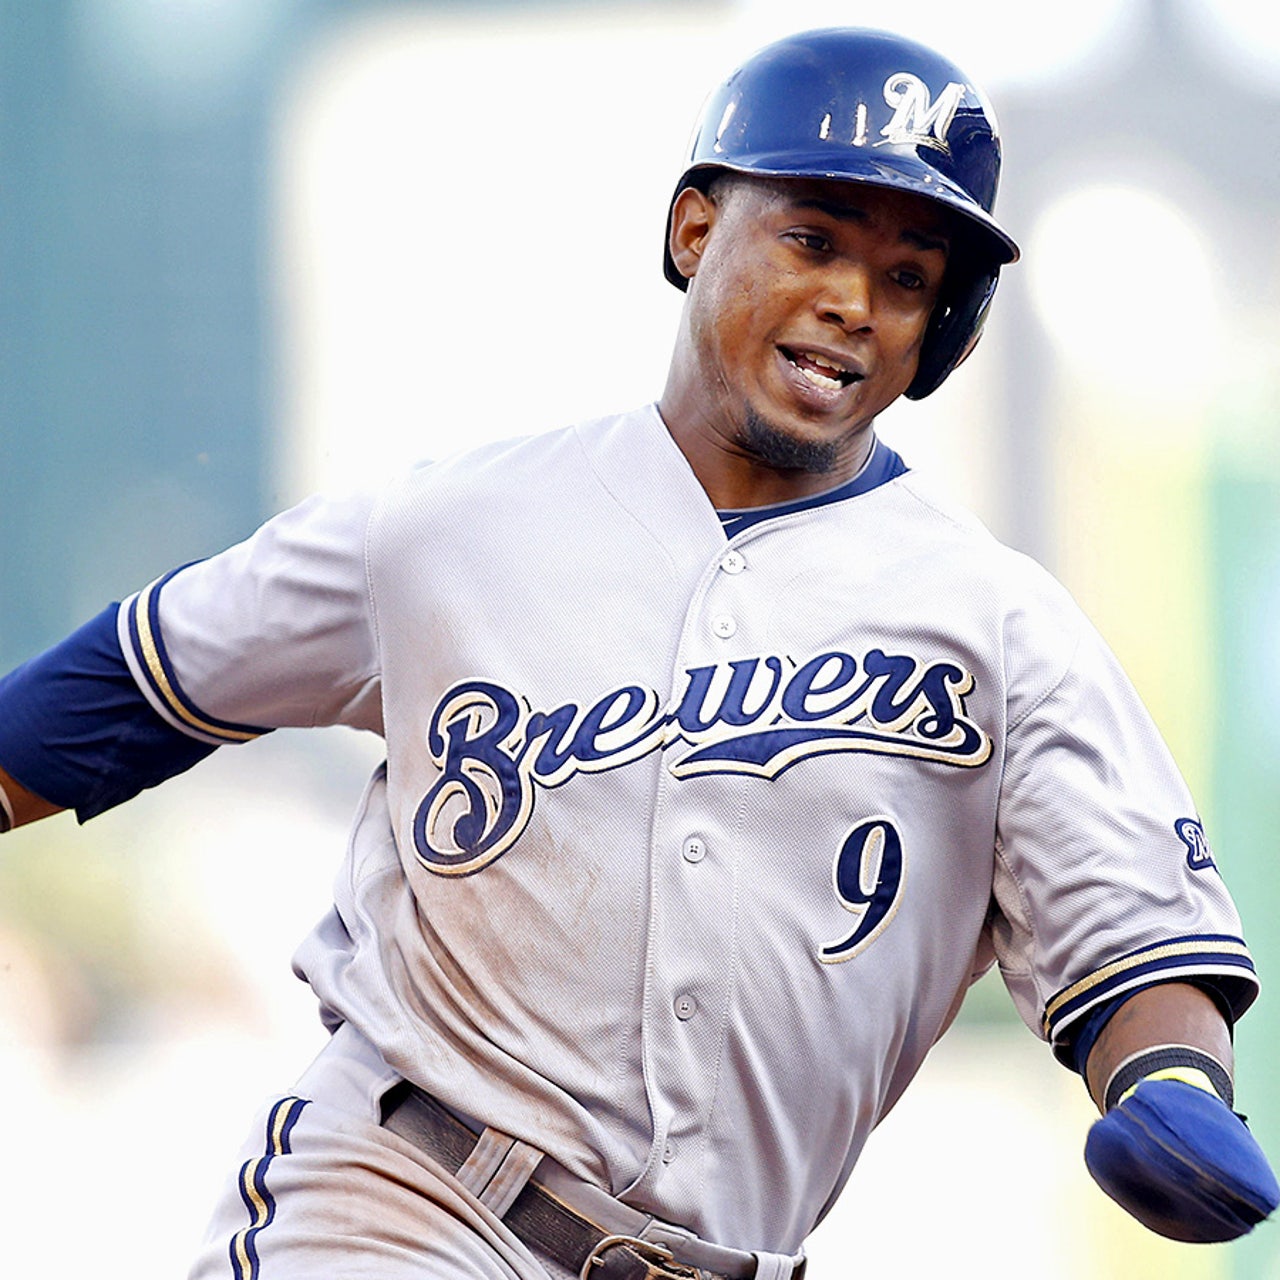 Jean Segura returning to club after death of son